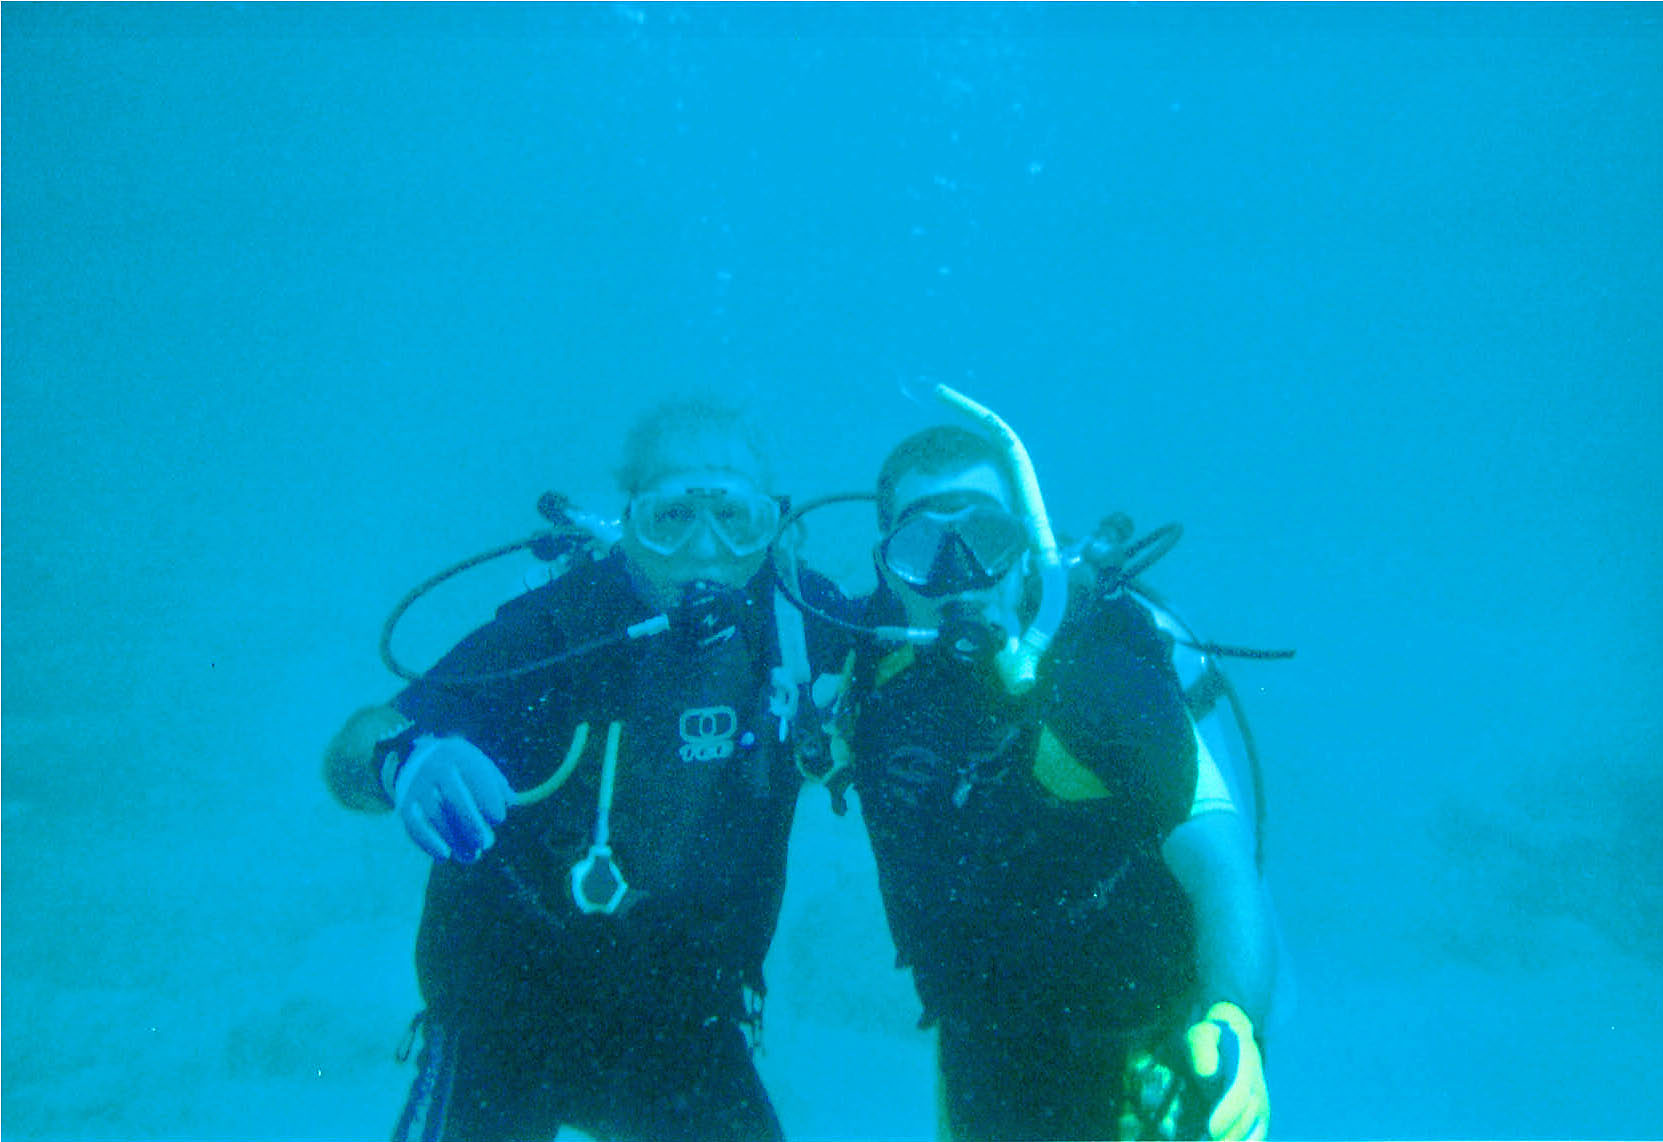 My 69 Year old father and I Enjoying some underwater